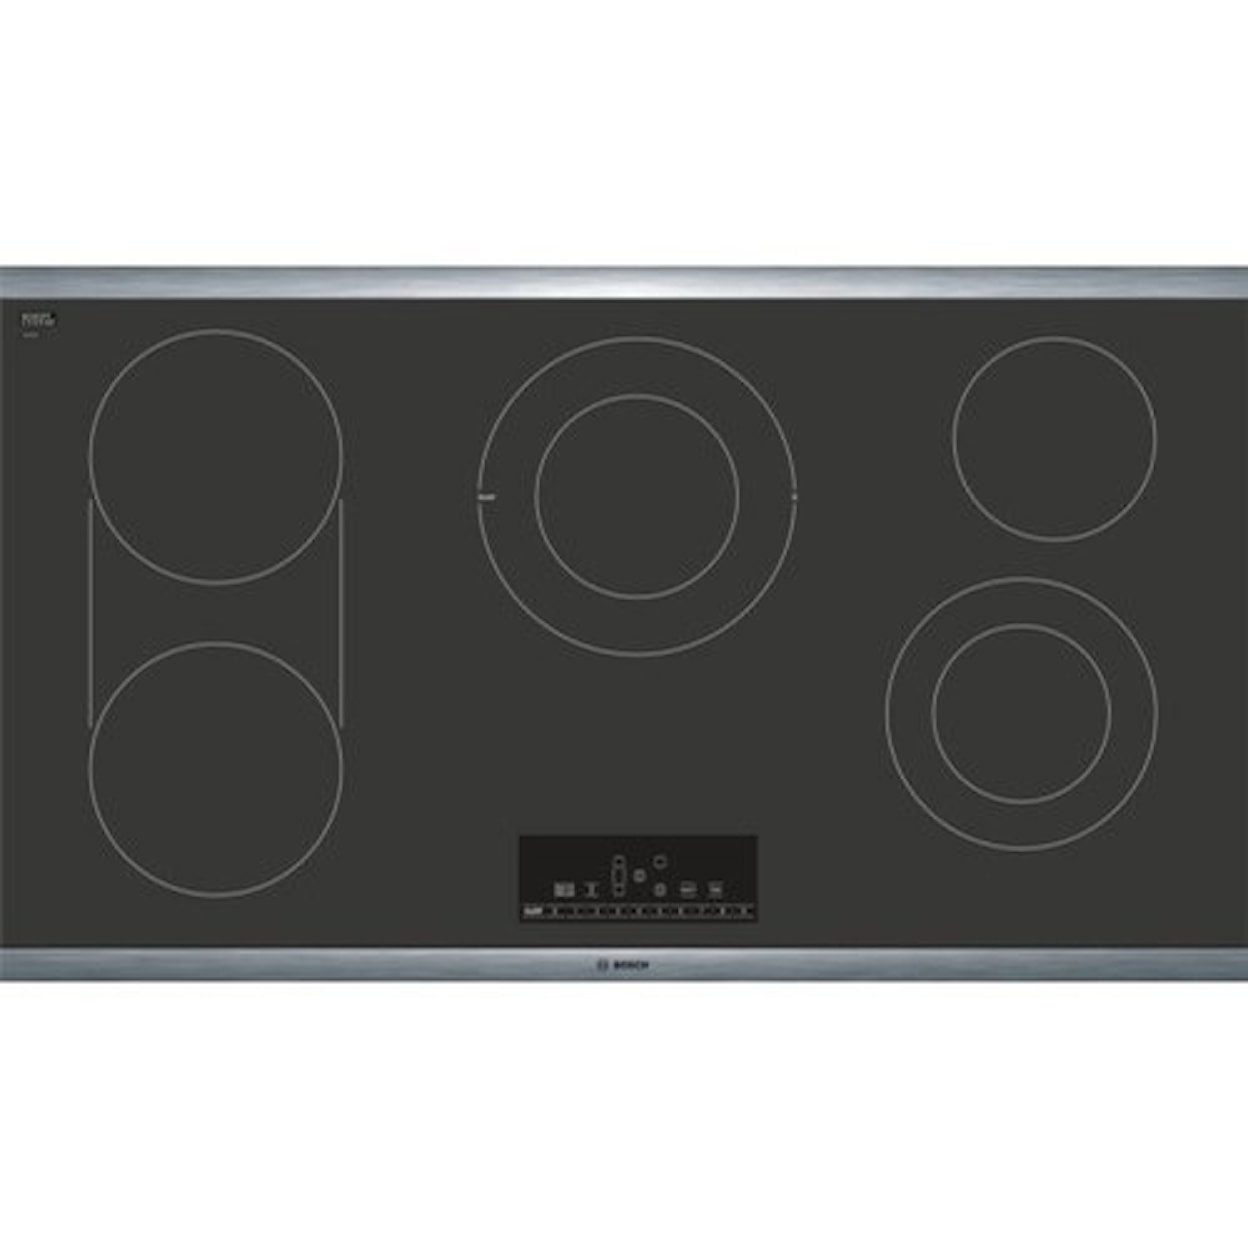 Bosch Electric Cooktops 36" Electric Cooktop - 800 Series